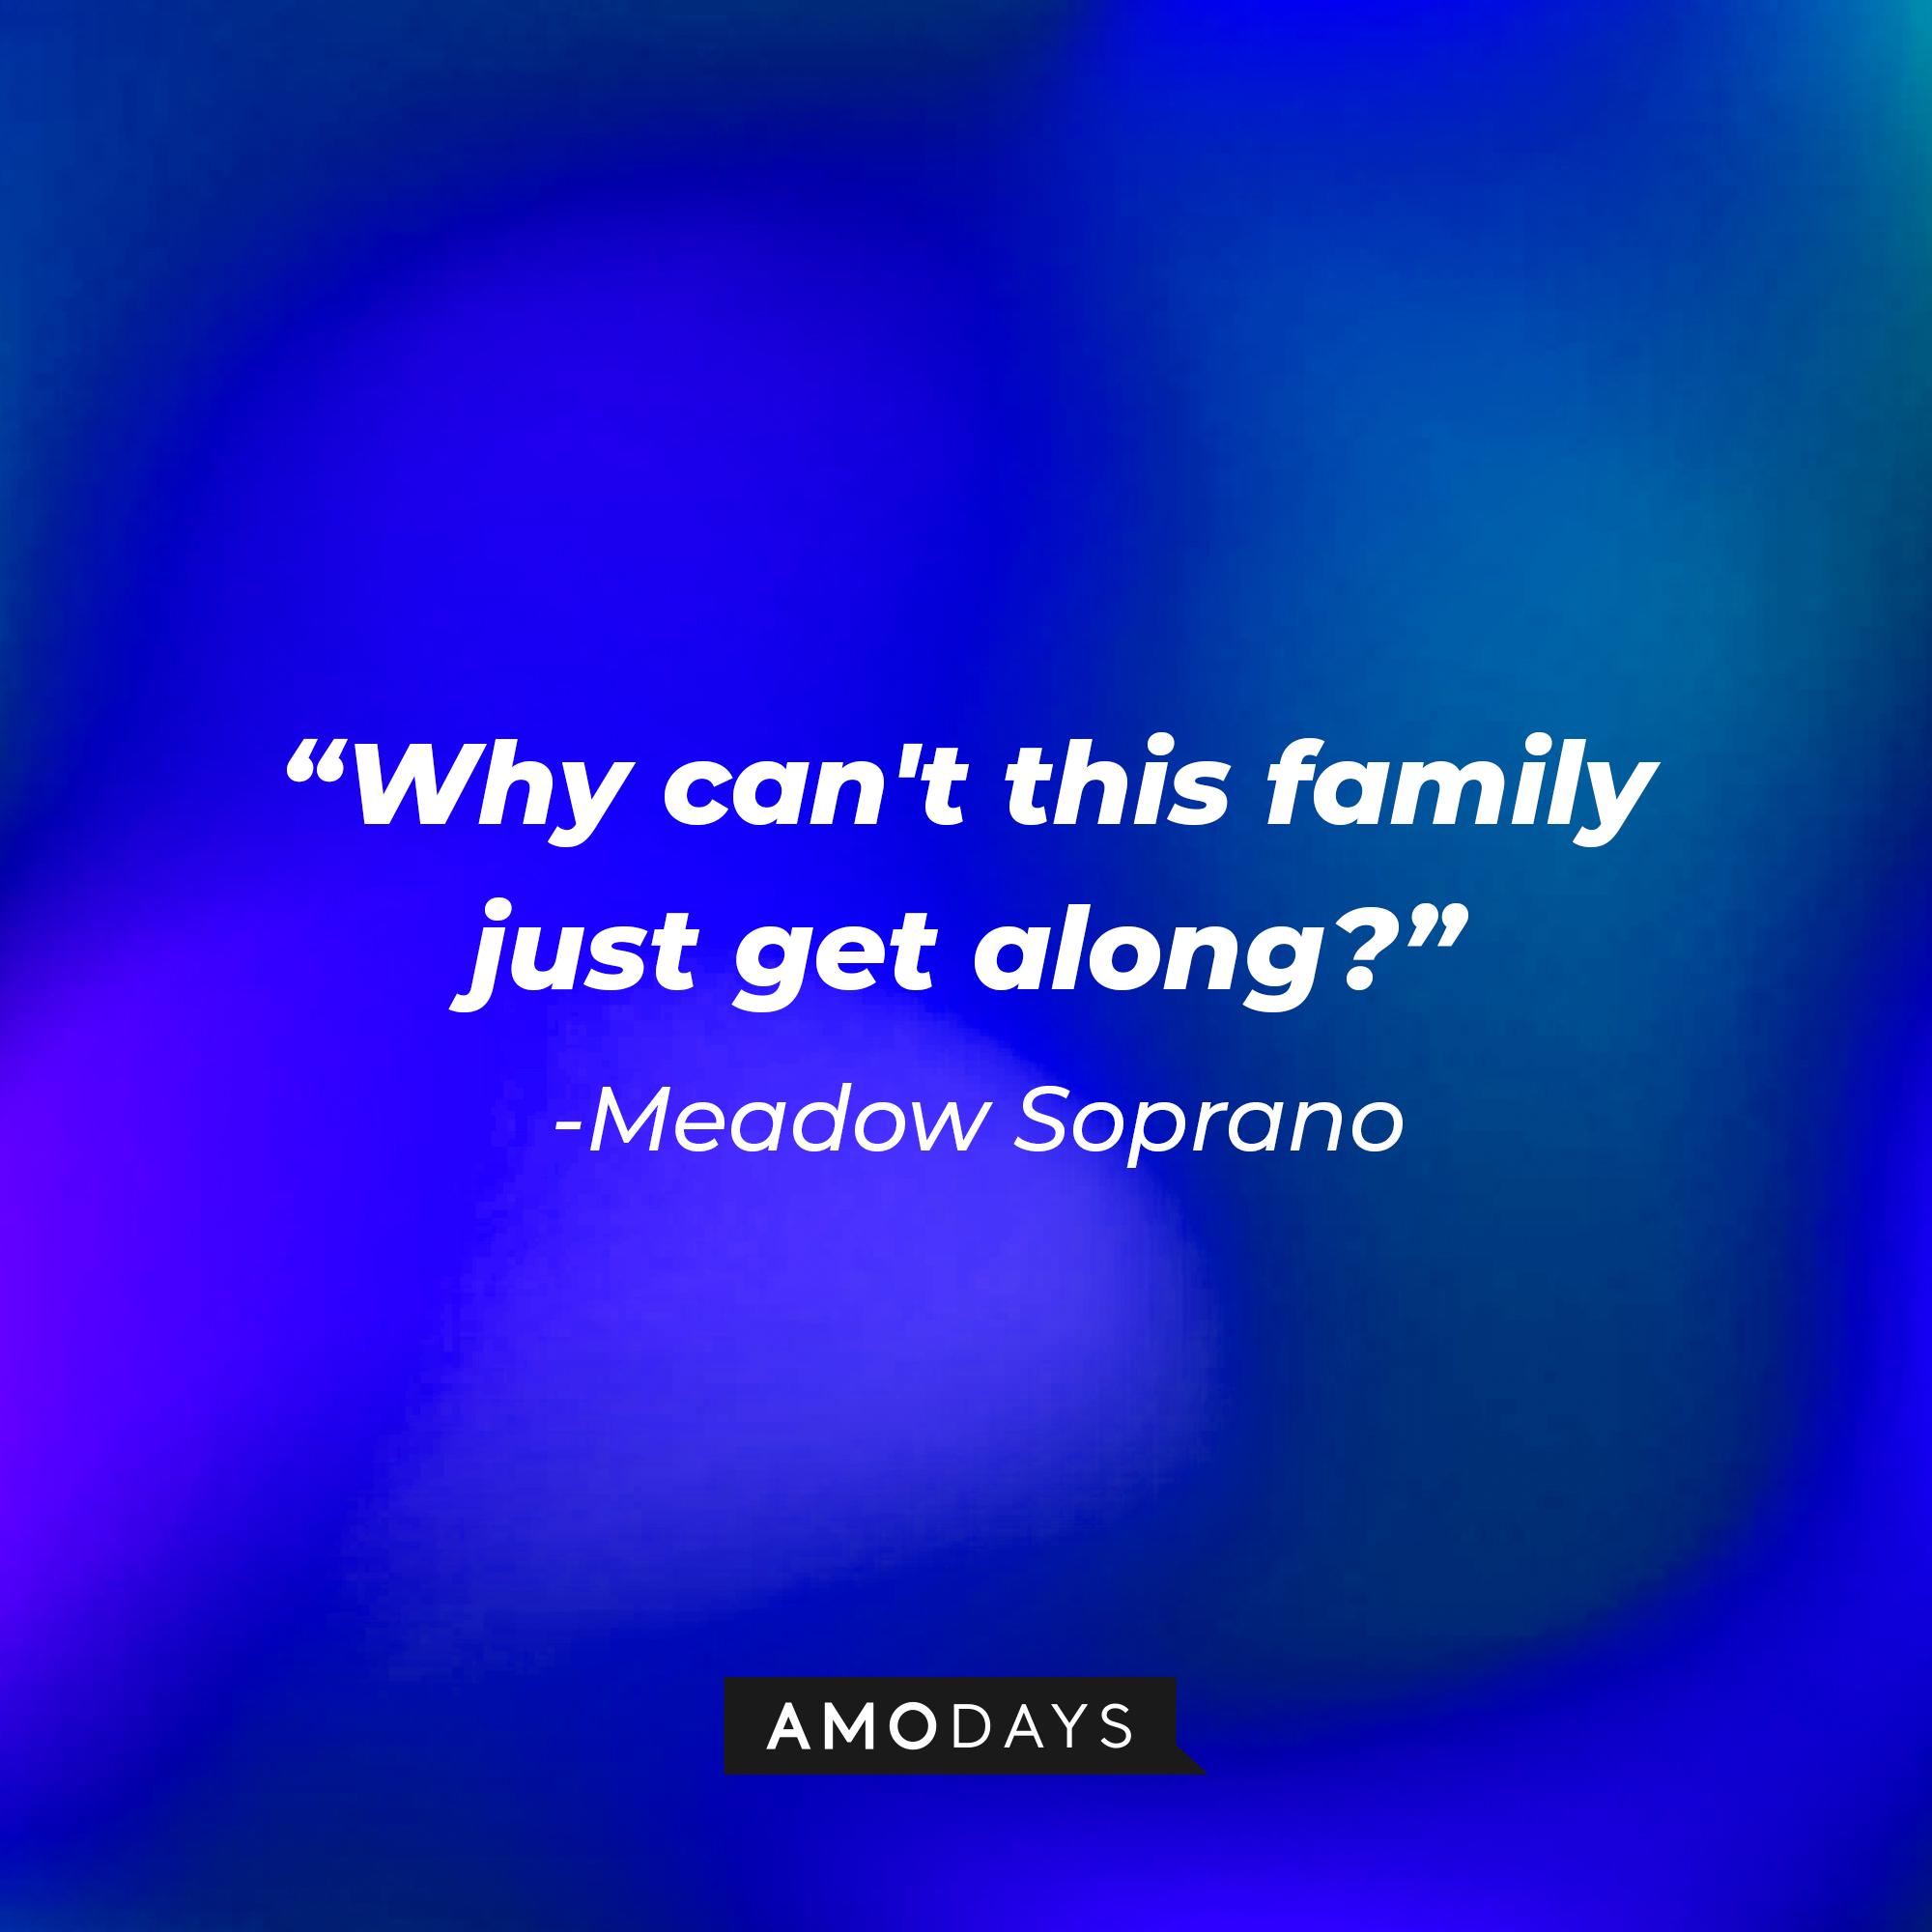 Meadow Soprano’s quote: "Why can't this family just get along?" | Source: AmoDays